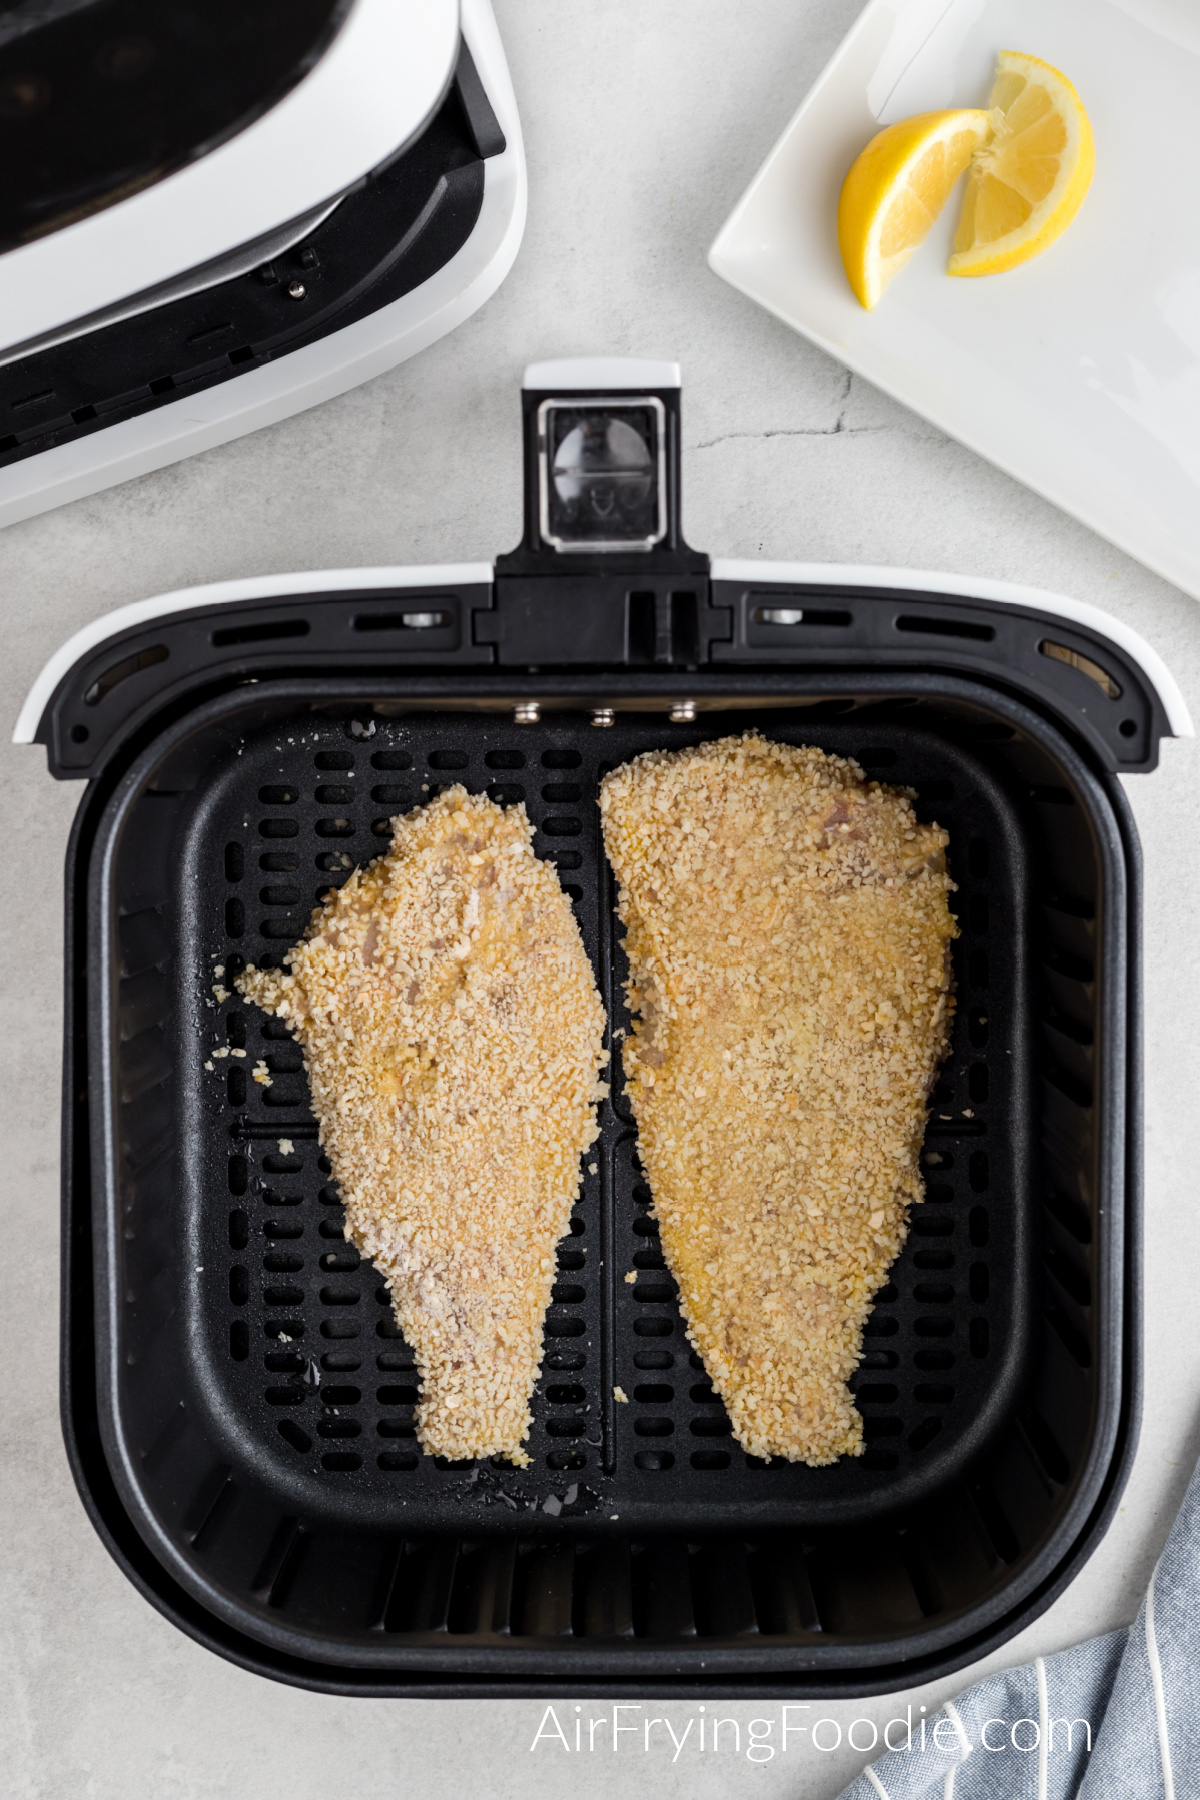 Breaded fish in air fryer basket, ready to cook.